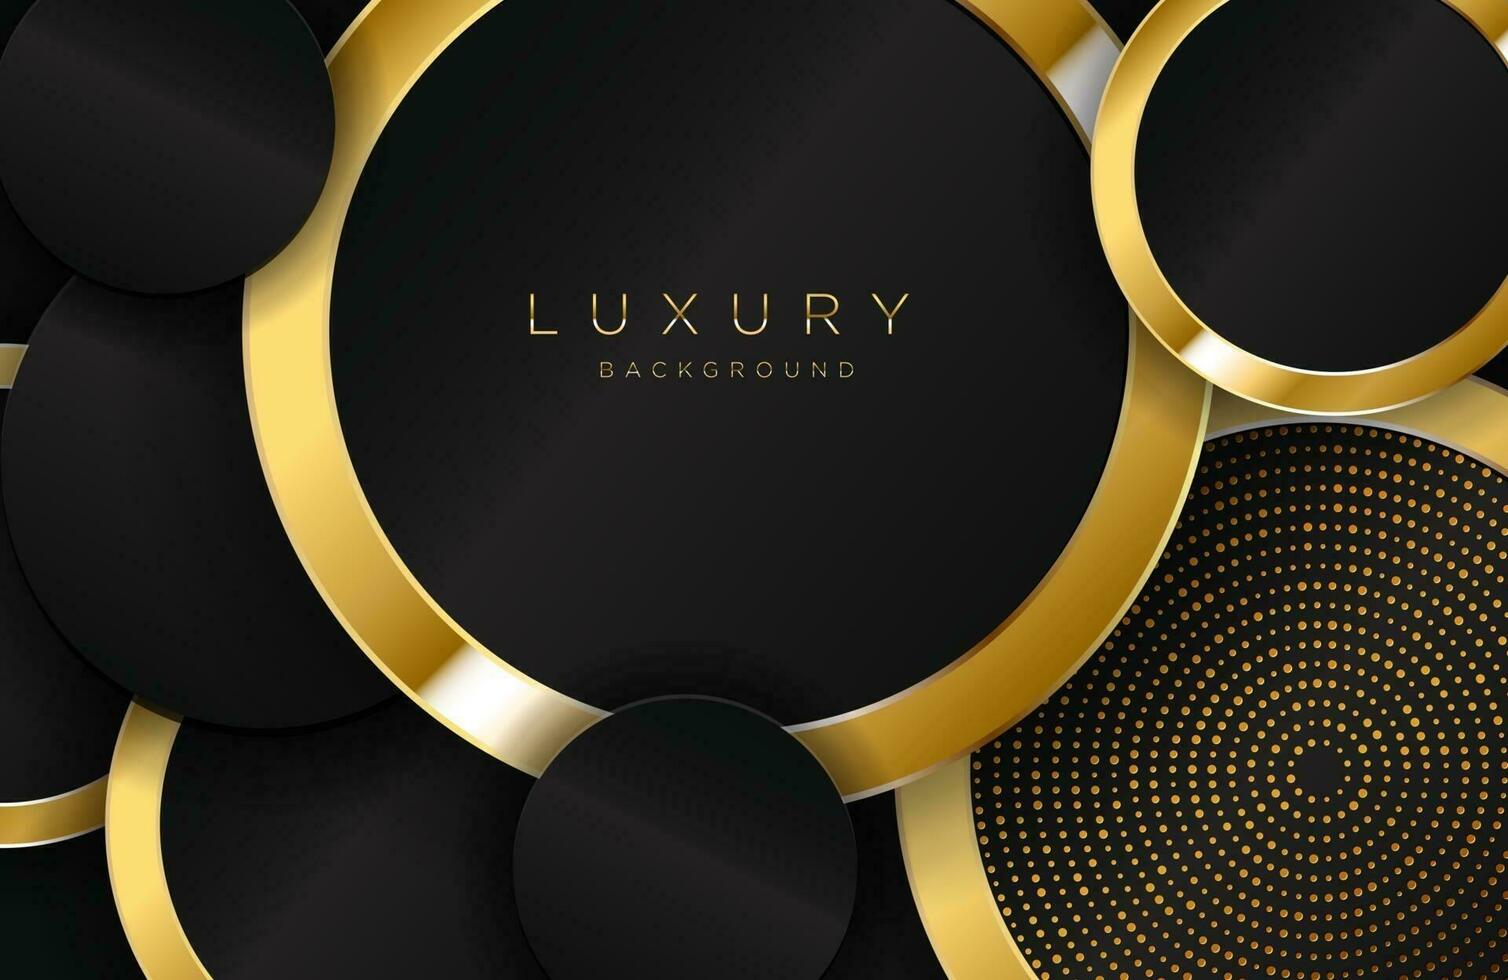 Modern layered background in gold and luxury style with circle shape composition Minimalist black and gold design with dotted pattern element vector